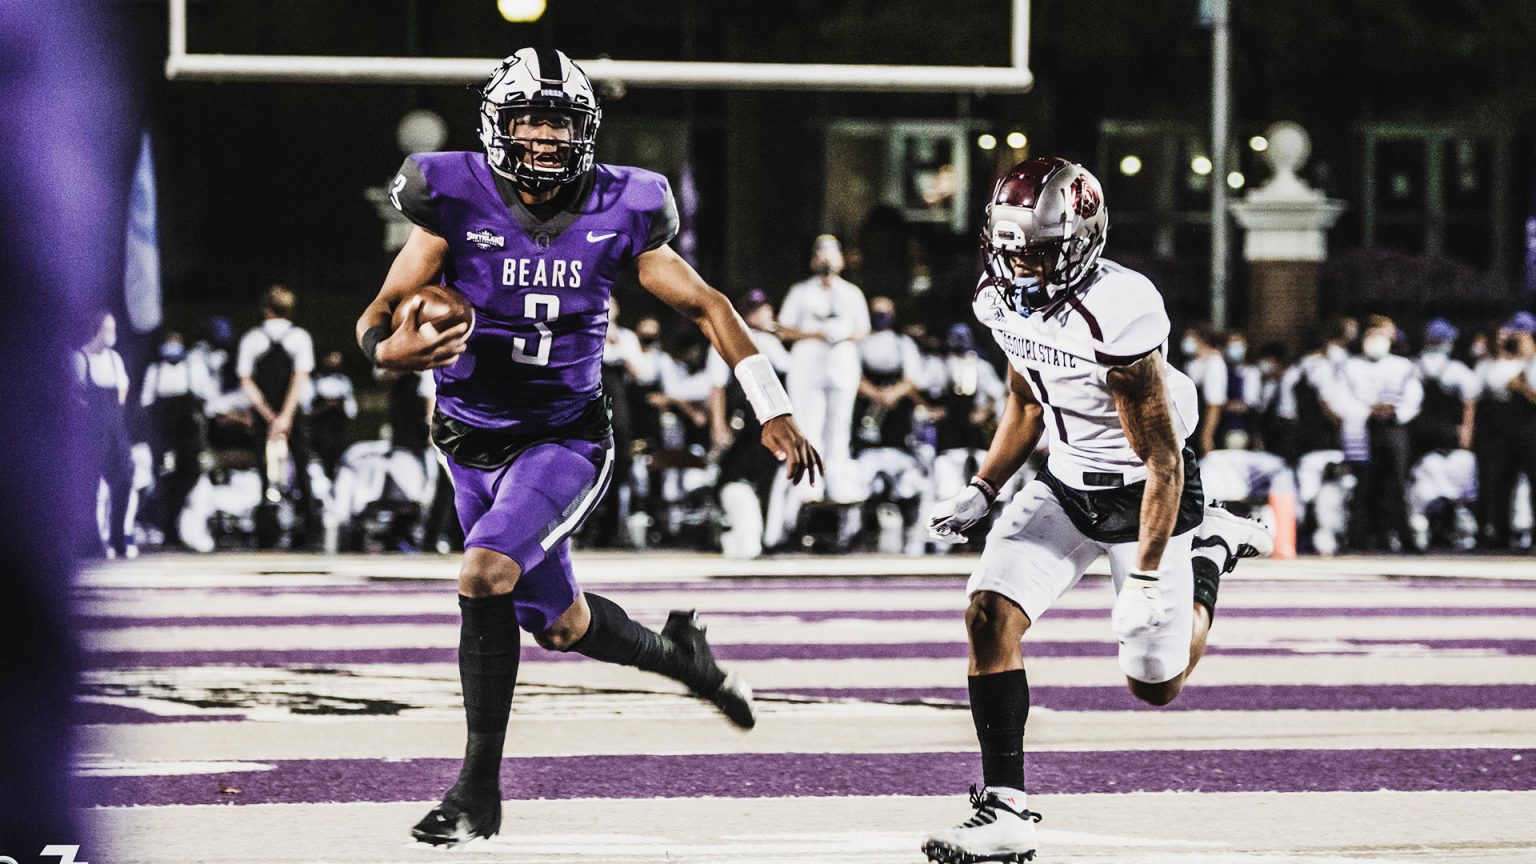 2021 Fcs Season Preview Central Arkansas The College Sports Journal 9562